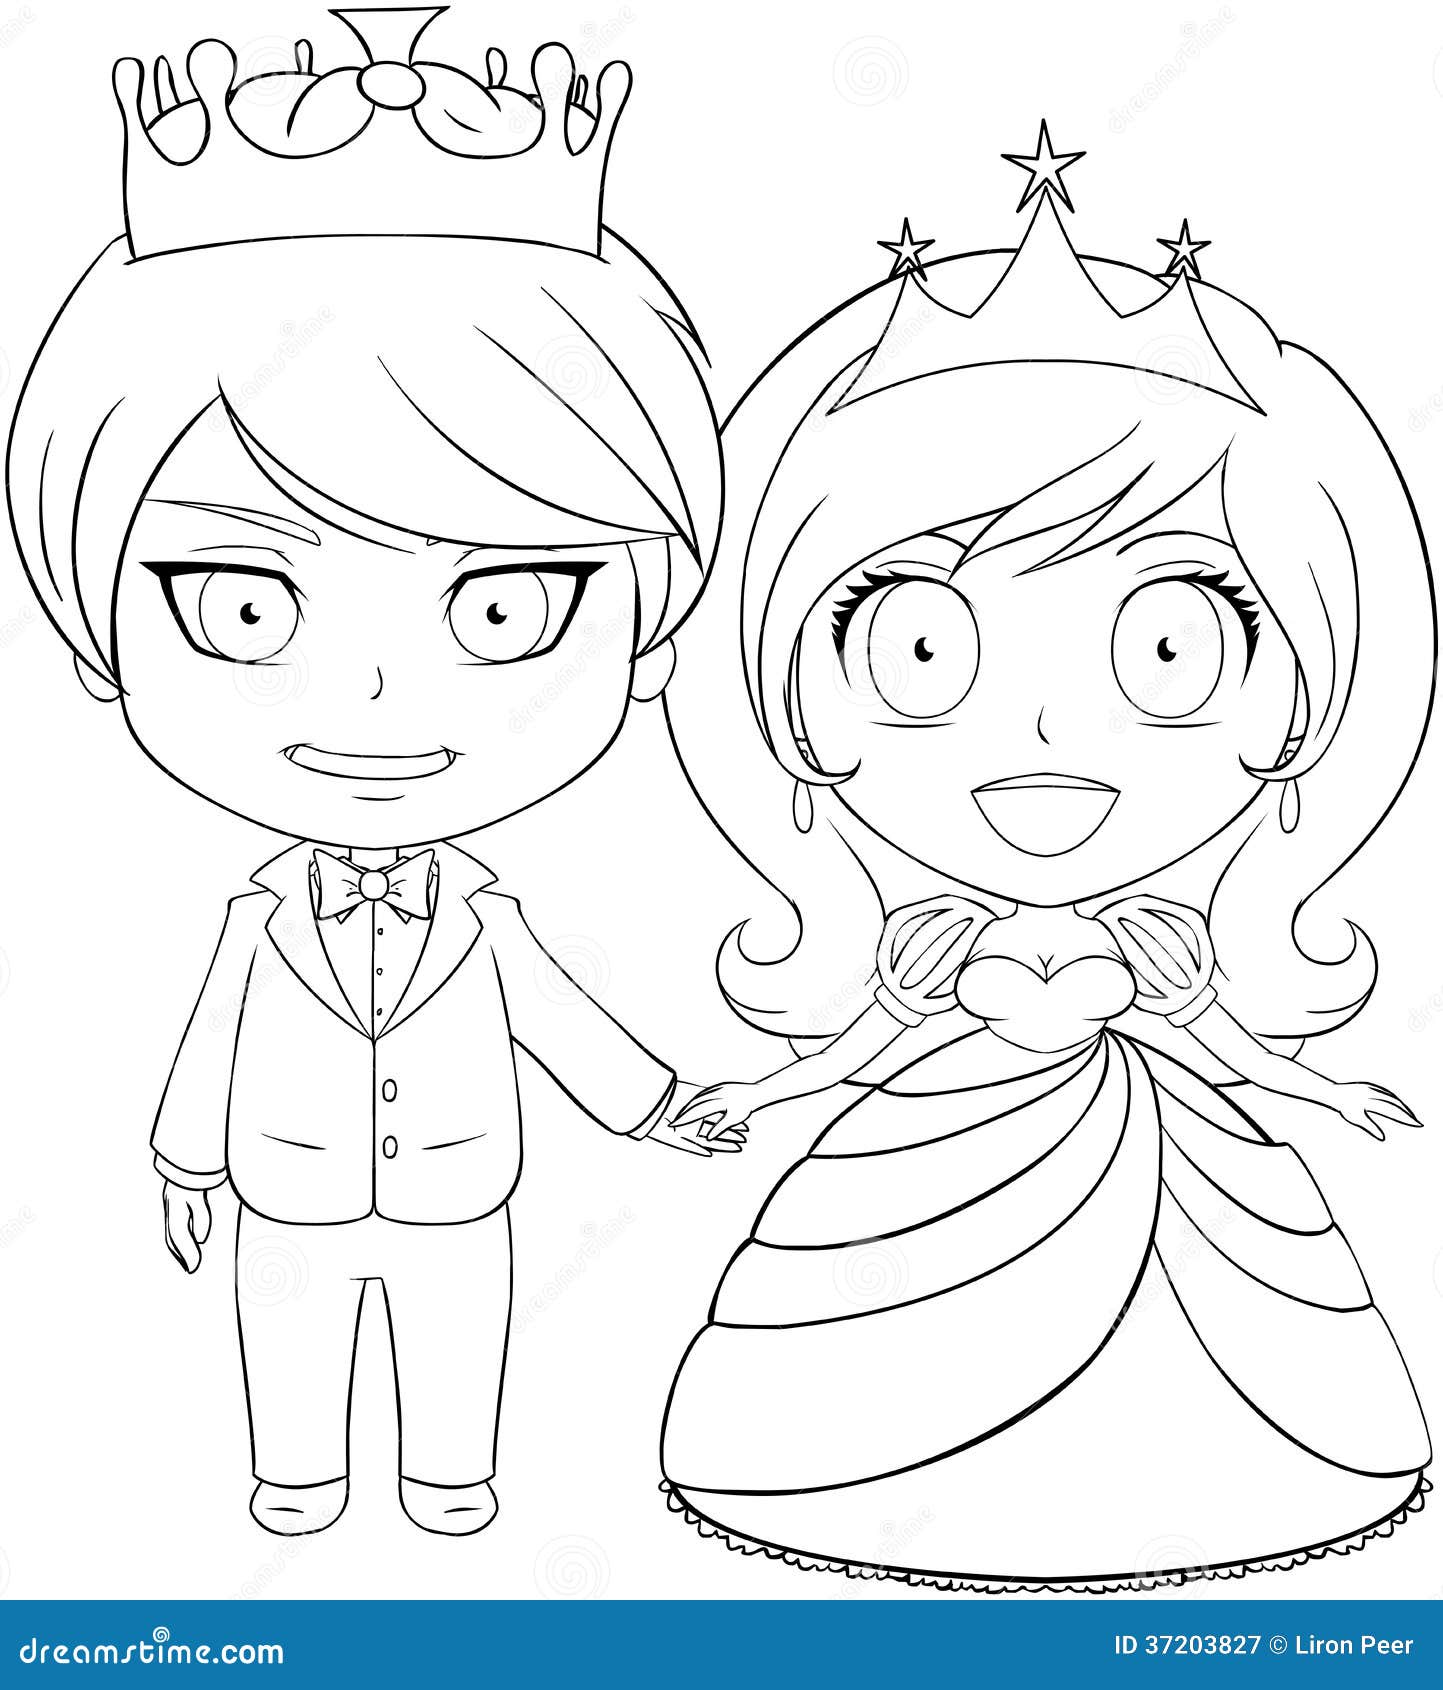 Prince and Princess Coloring Page 20 Stock Vector   Illustration of ...